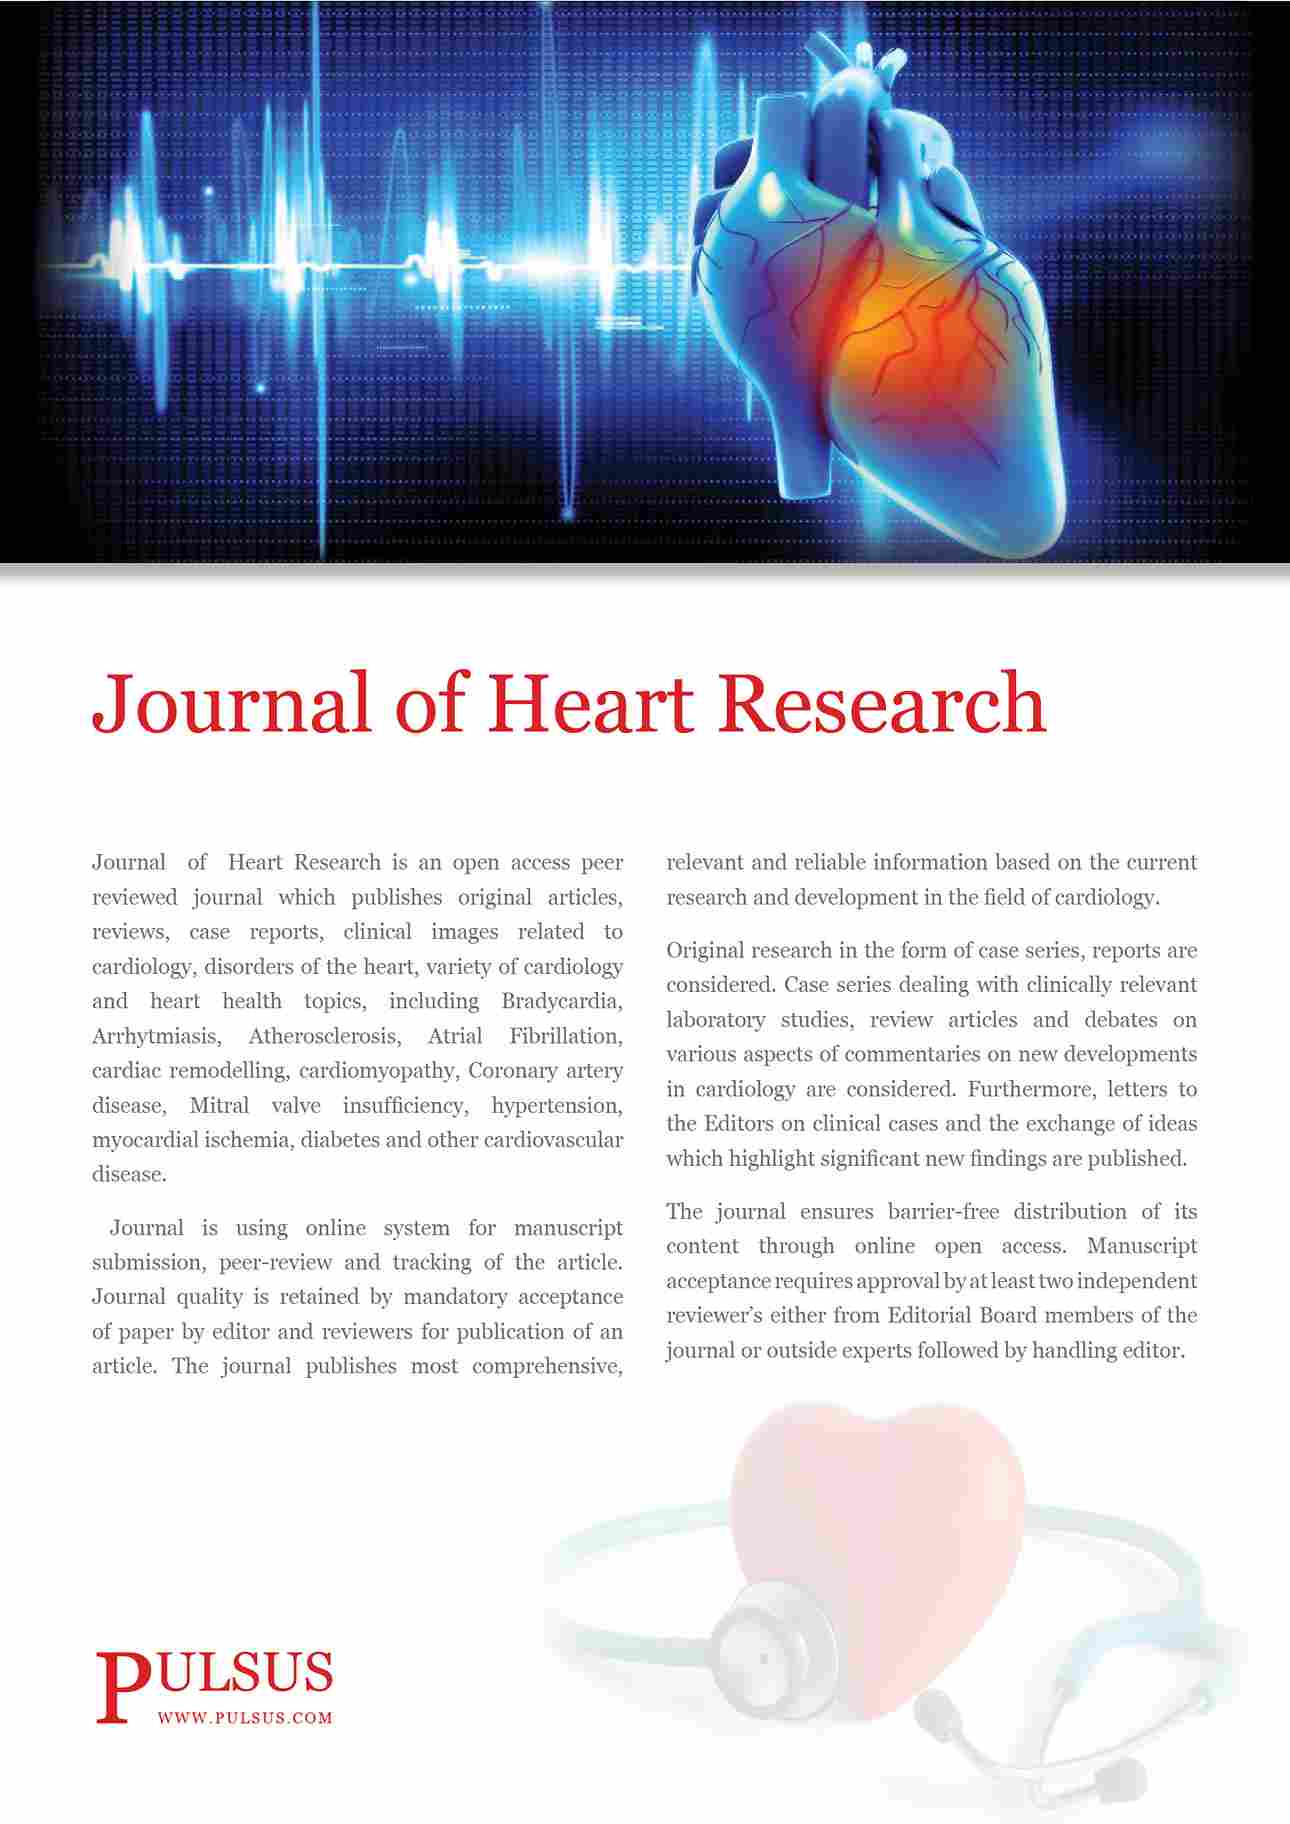 Journal of Heart Research